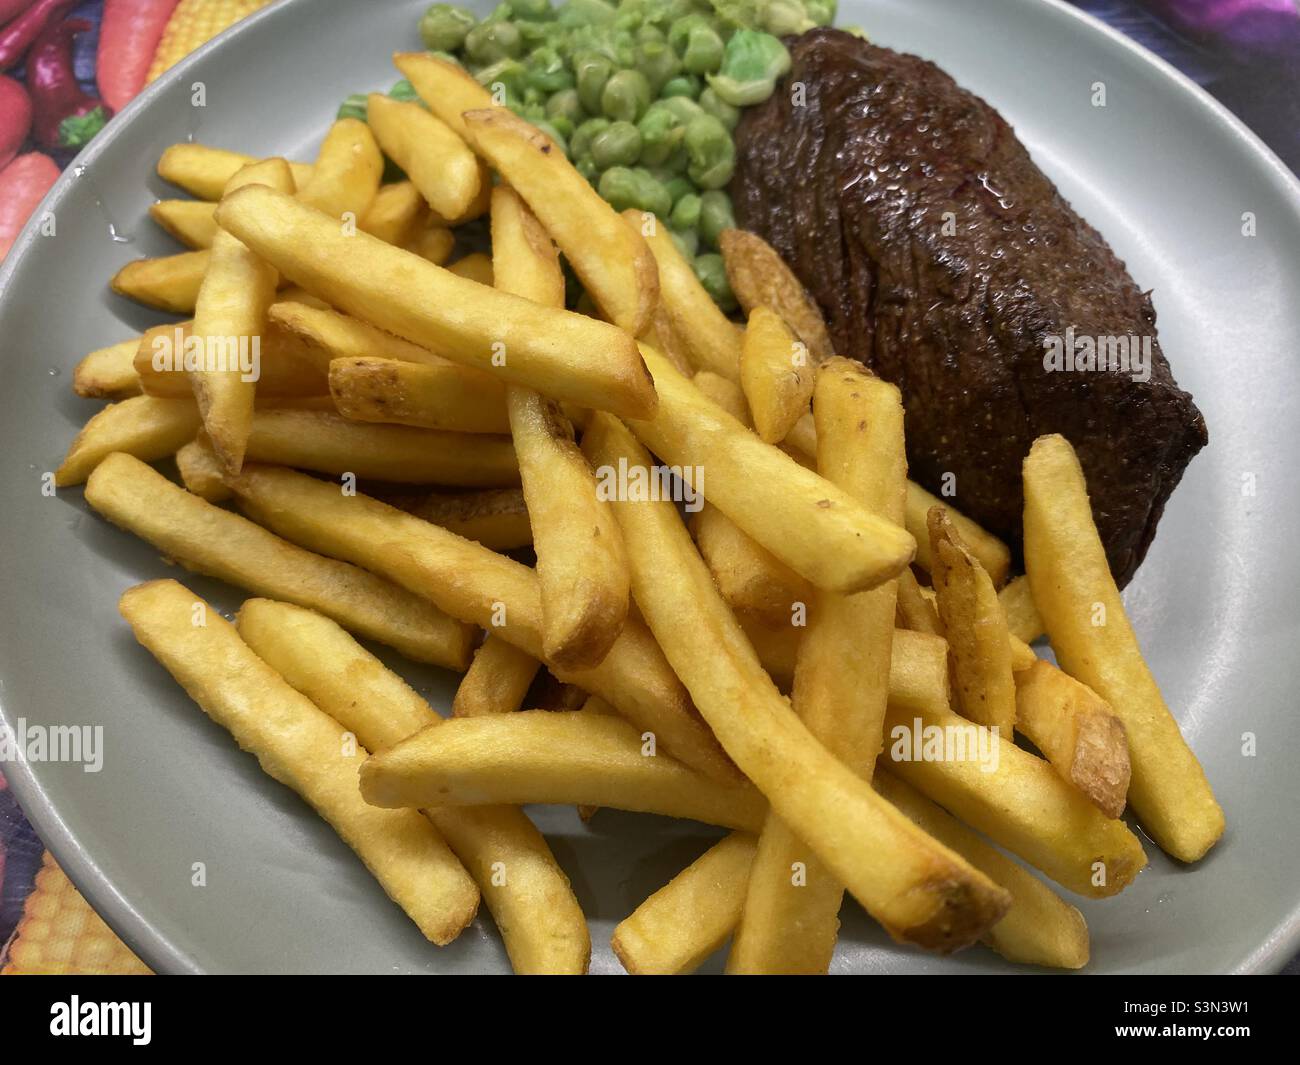 Steak, butter and juices, Marrowfat Peas, Skin on Fries Stock Photo